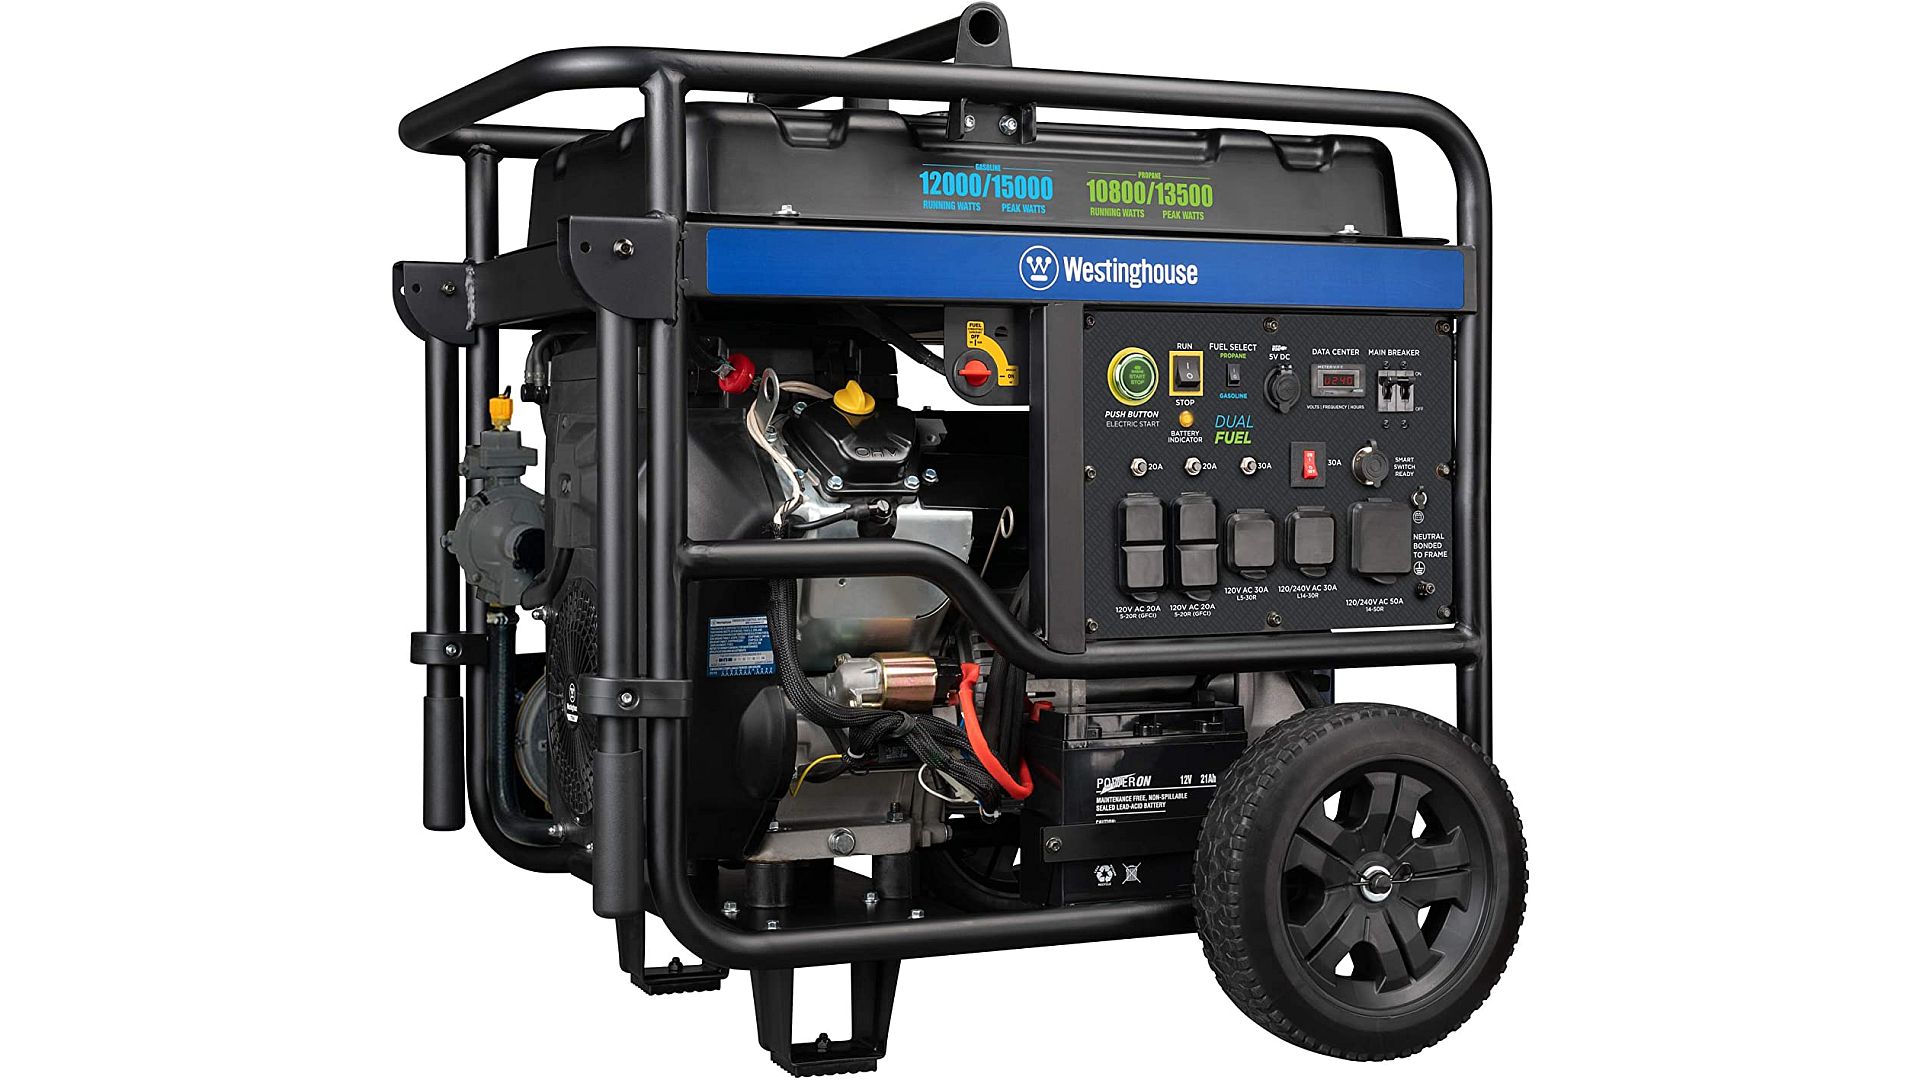 WGen12000DF Is Large Dual Fuel Generator For Backup Power